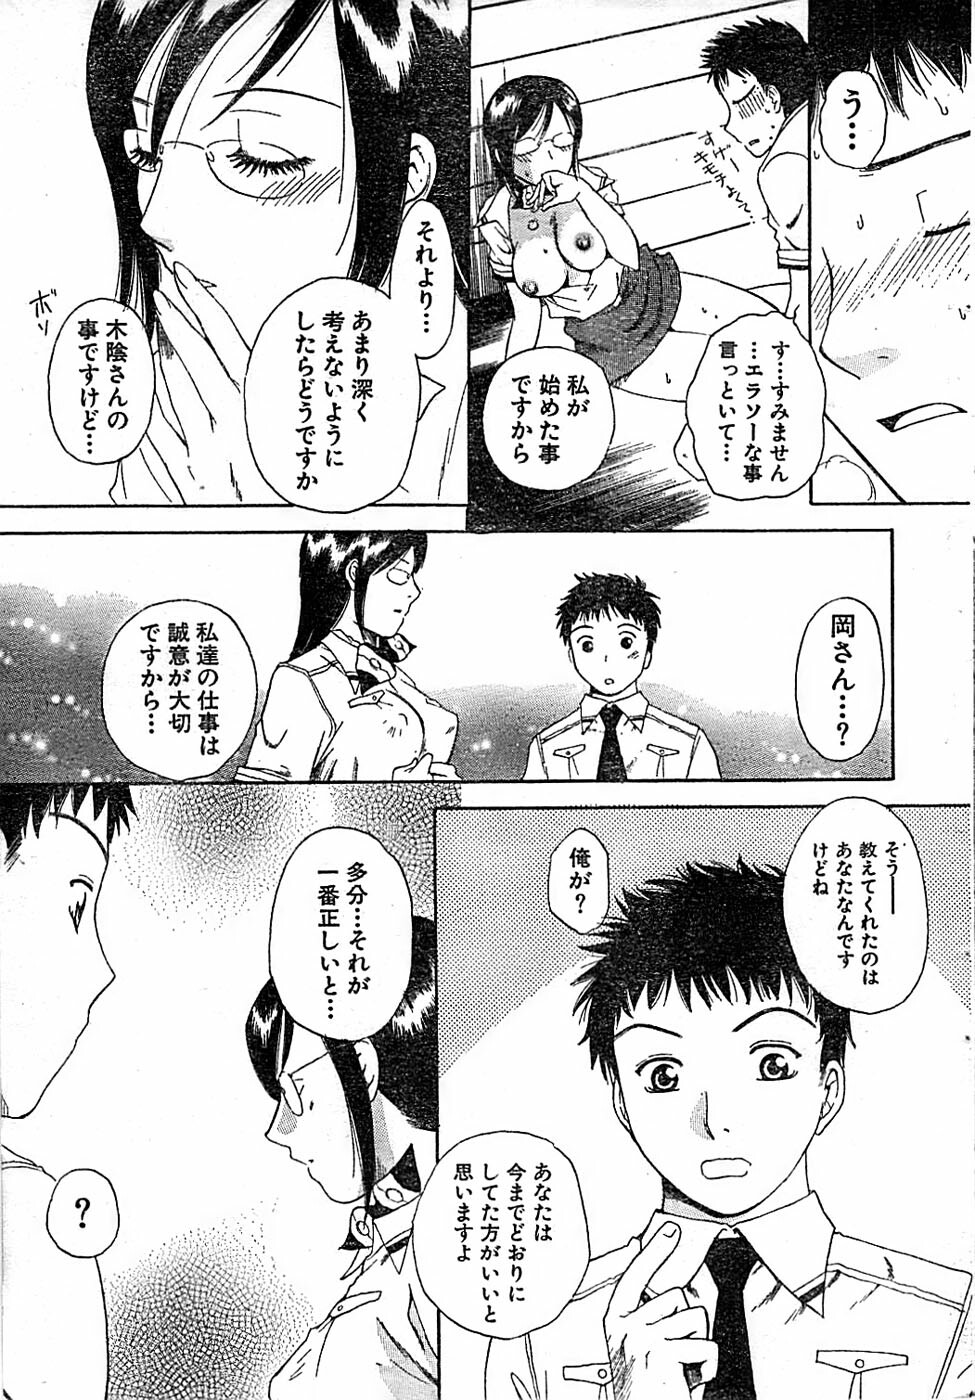 Doki! Special 2006-04 page 33 full